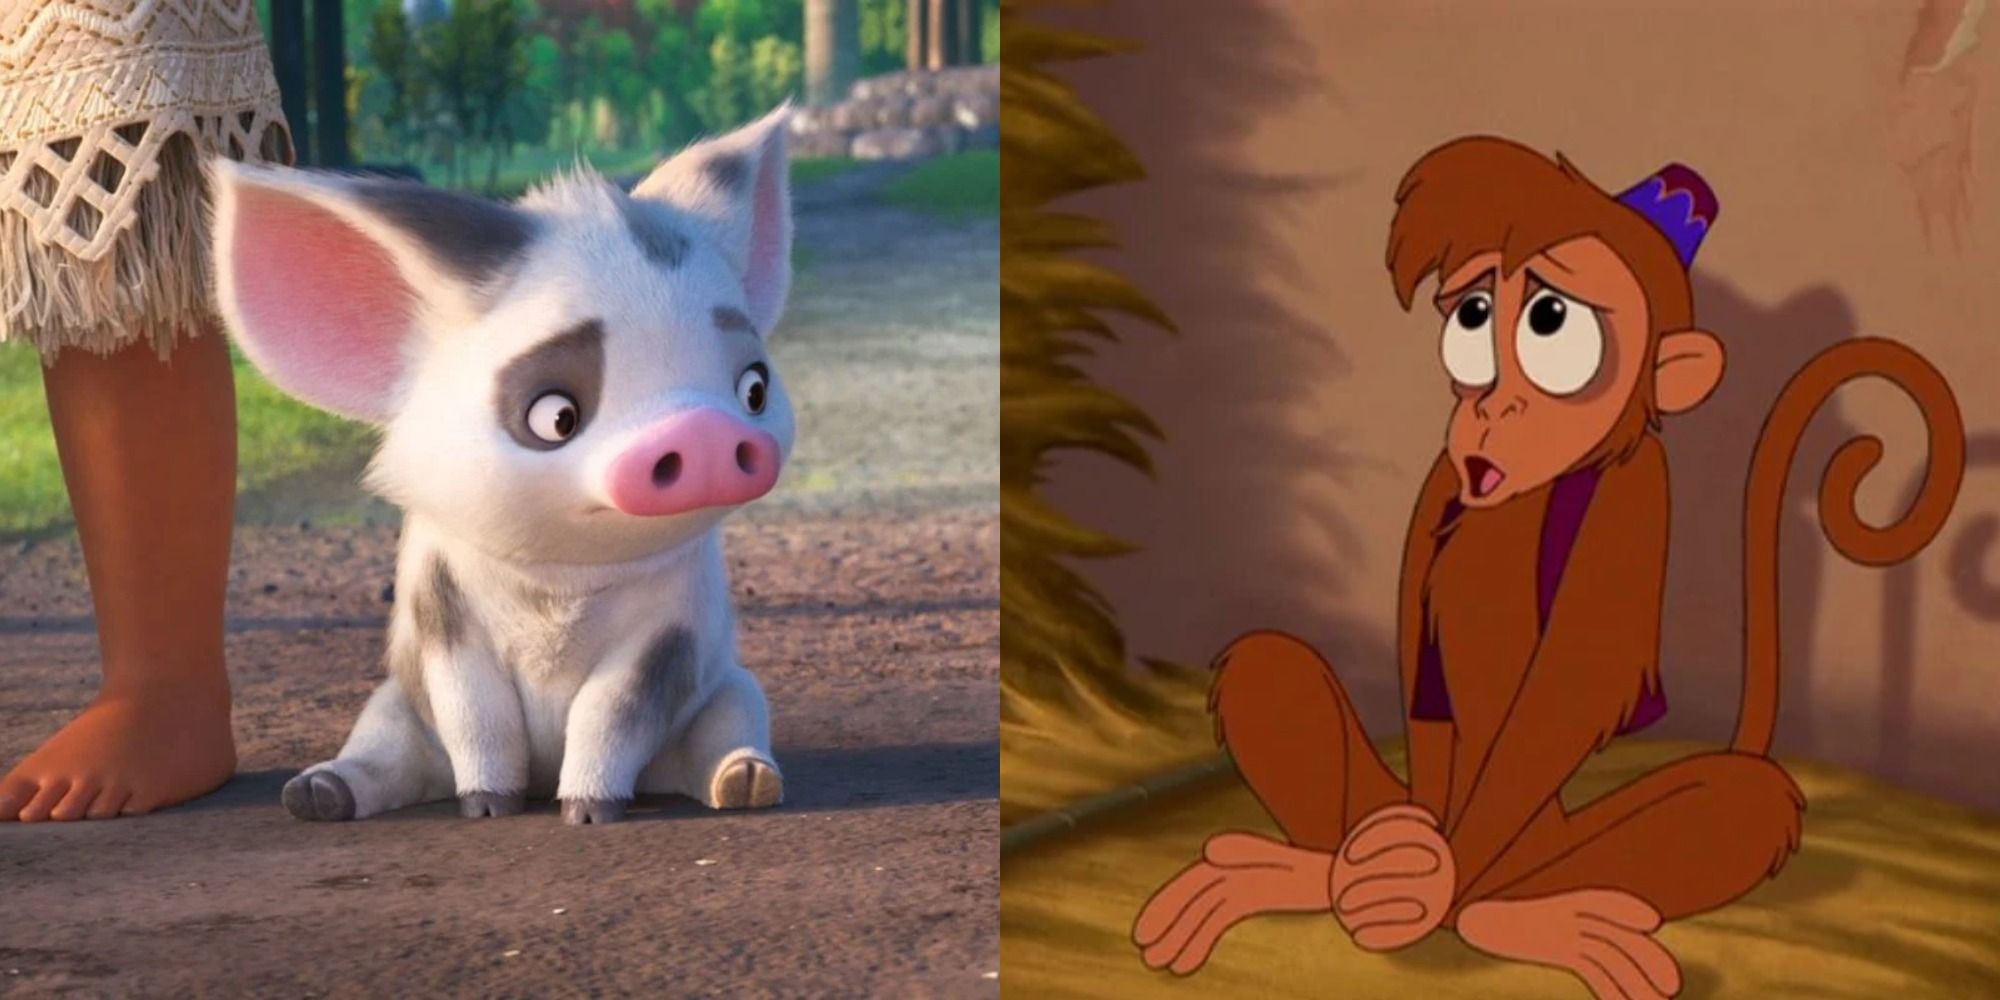 Which Disney Animal Are You, Based On Your Chinese Zodiac Sign?